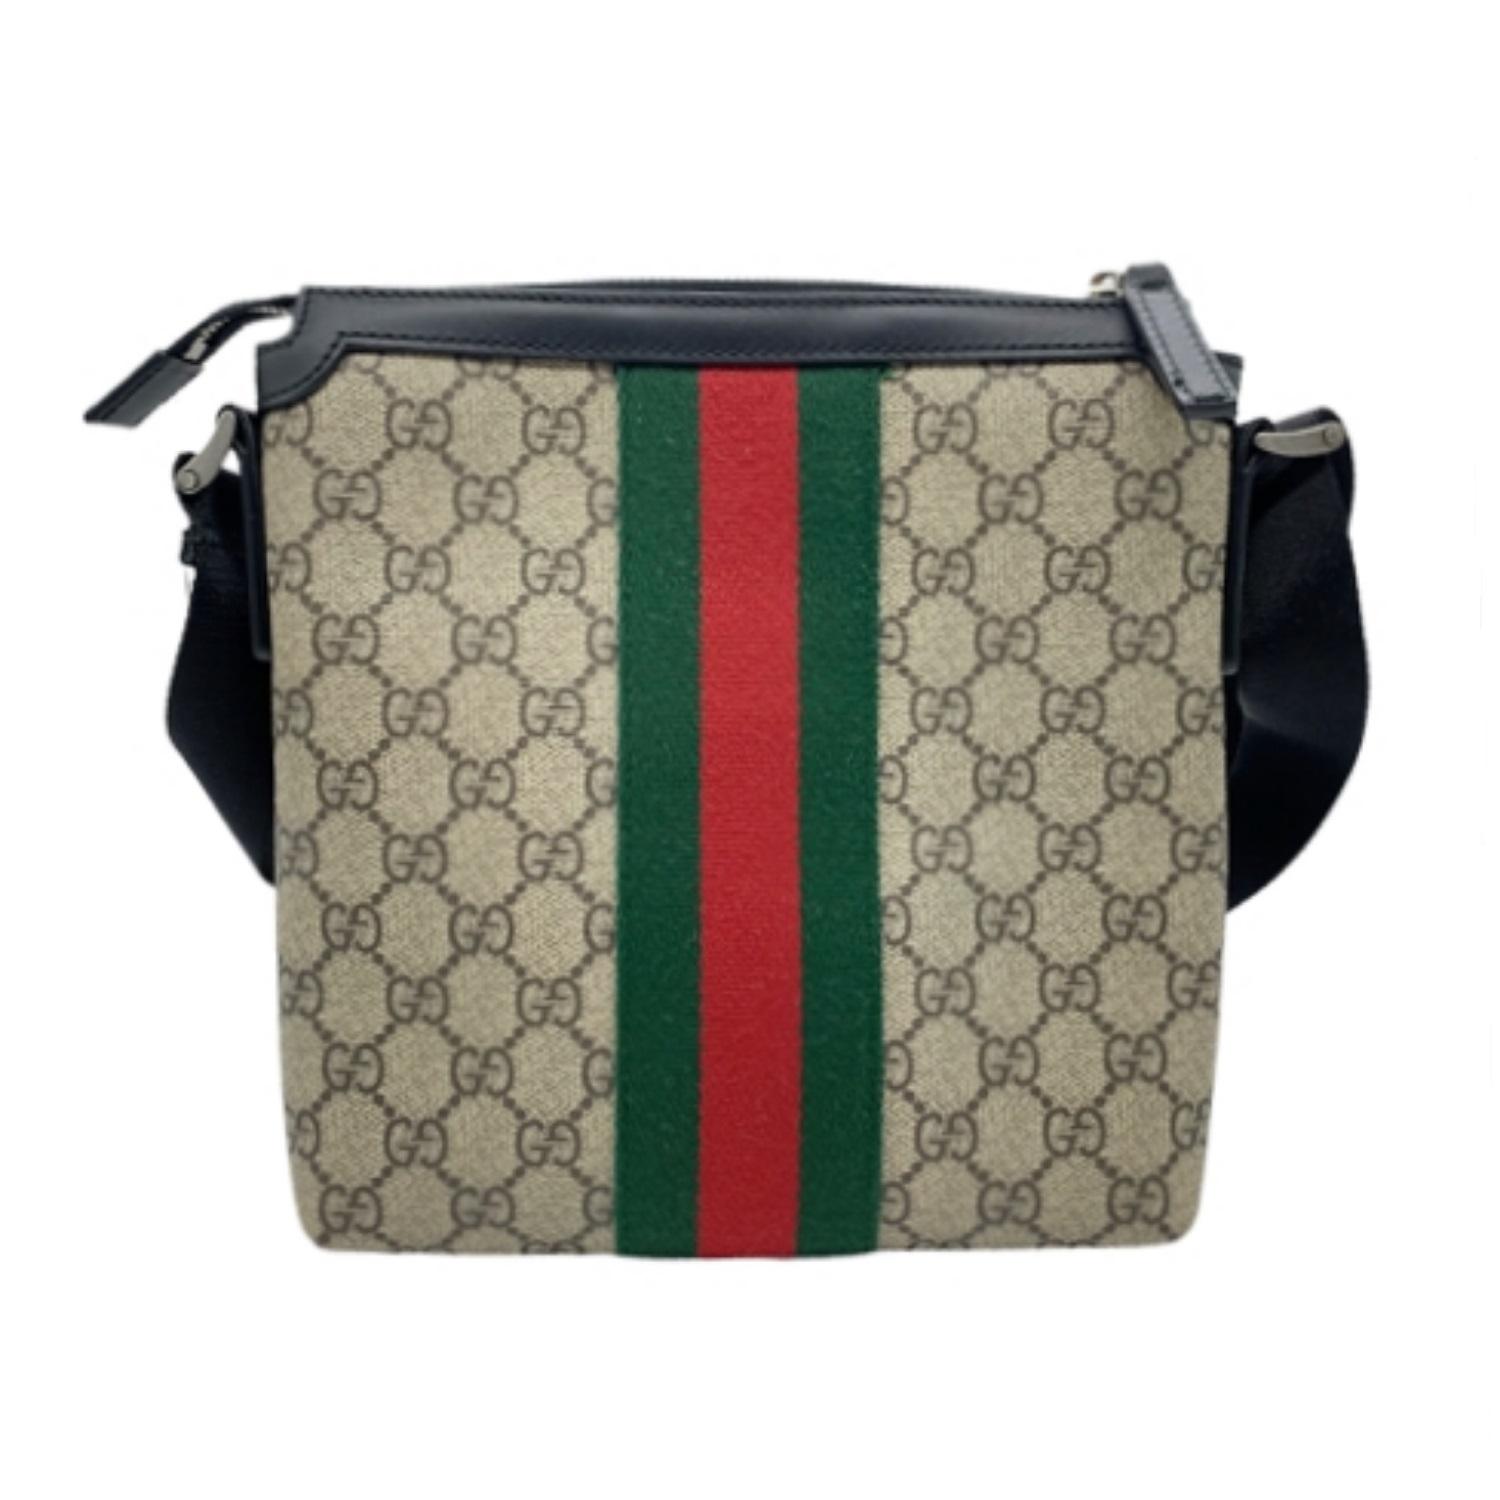 Coated canvas messenger bag in beige featuring logo pattern printed in brown. Buffed black leather trim throughout. Adjustable shoulder strap in black with leather strap pad. Leather logo appliqué at face. Signature striped web trim in green and red